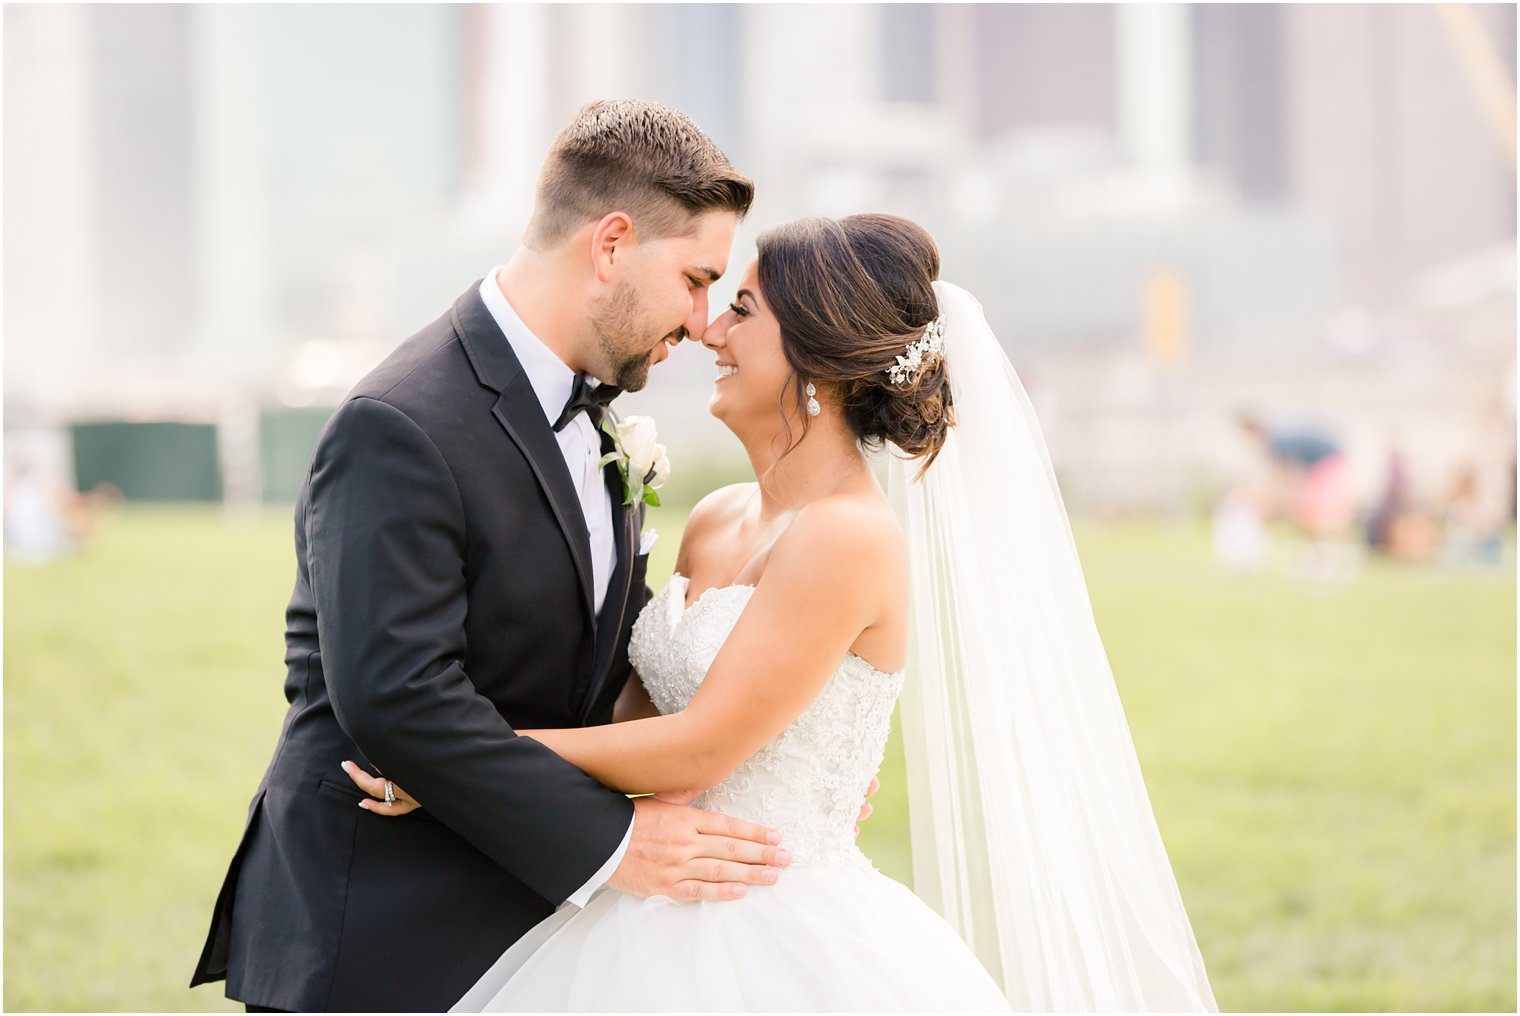 Natural portrait of bride and groom at the Brooklyn Bridge